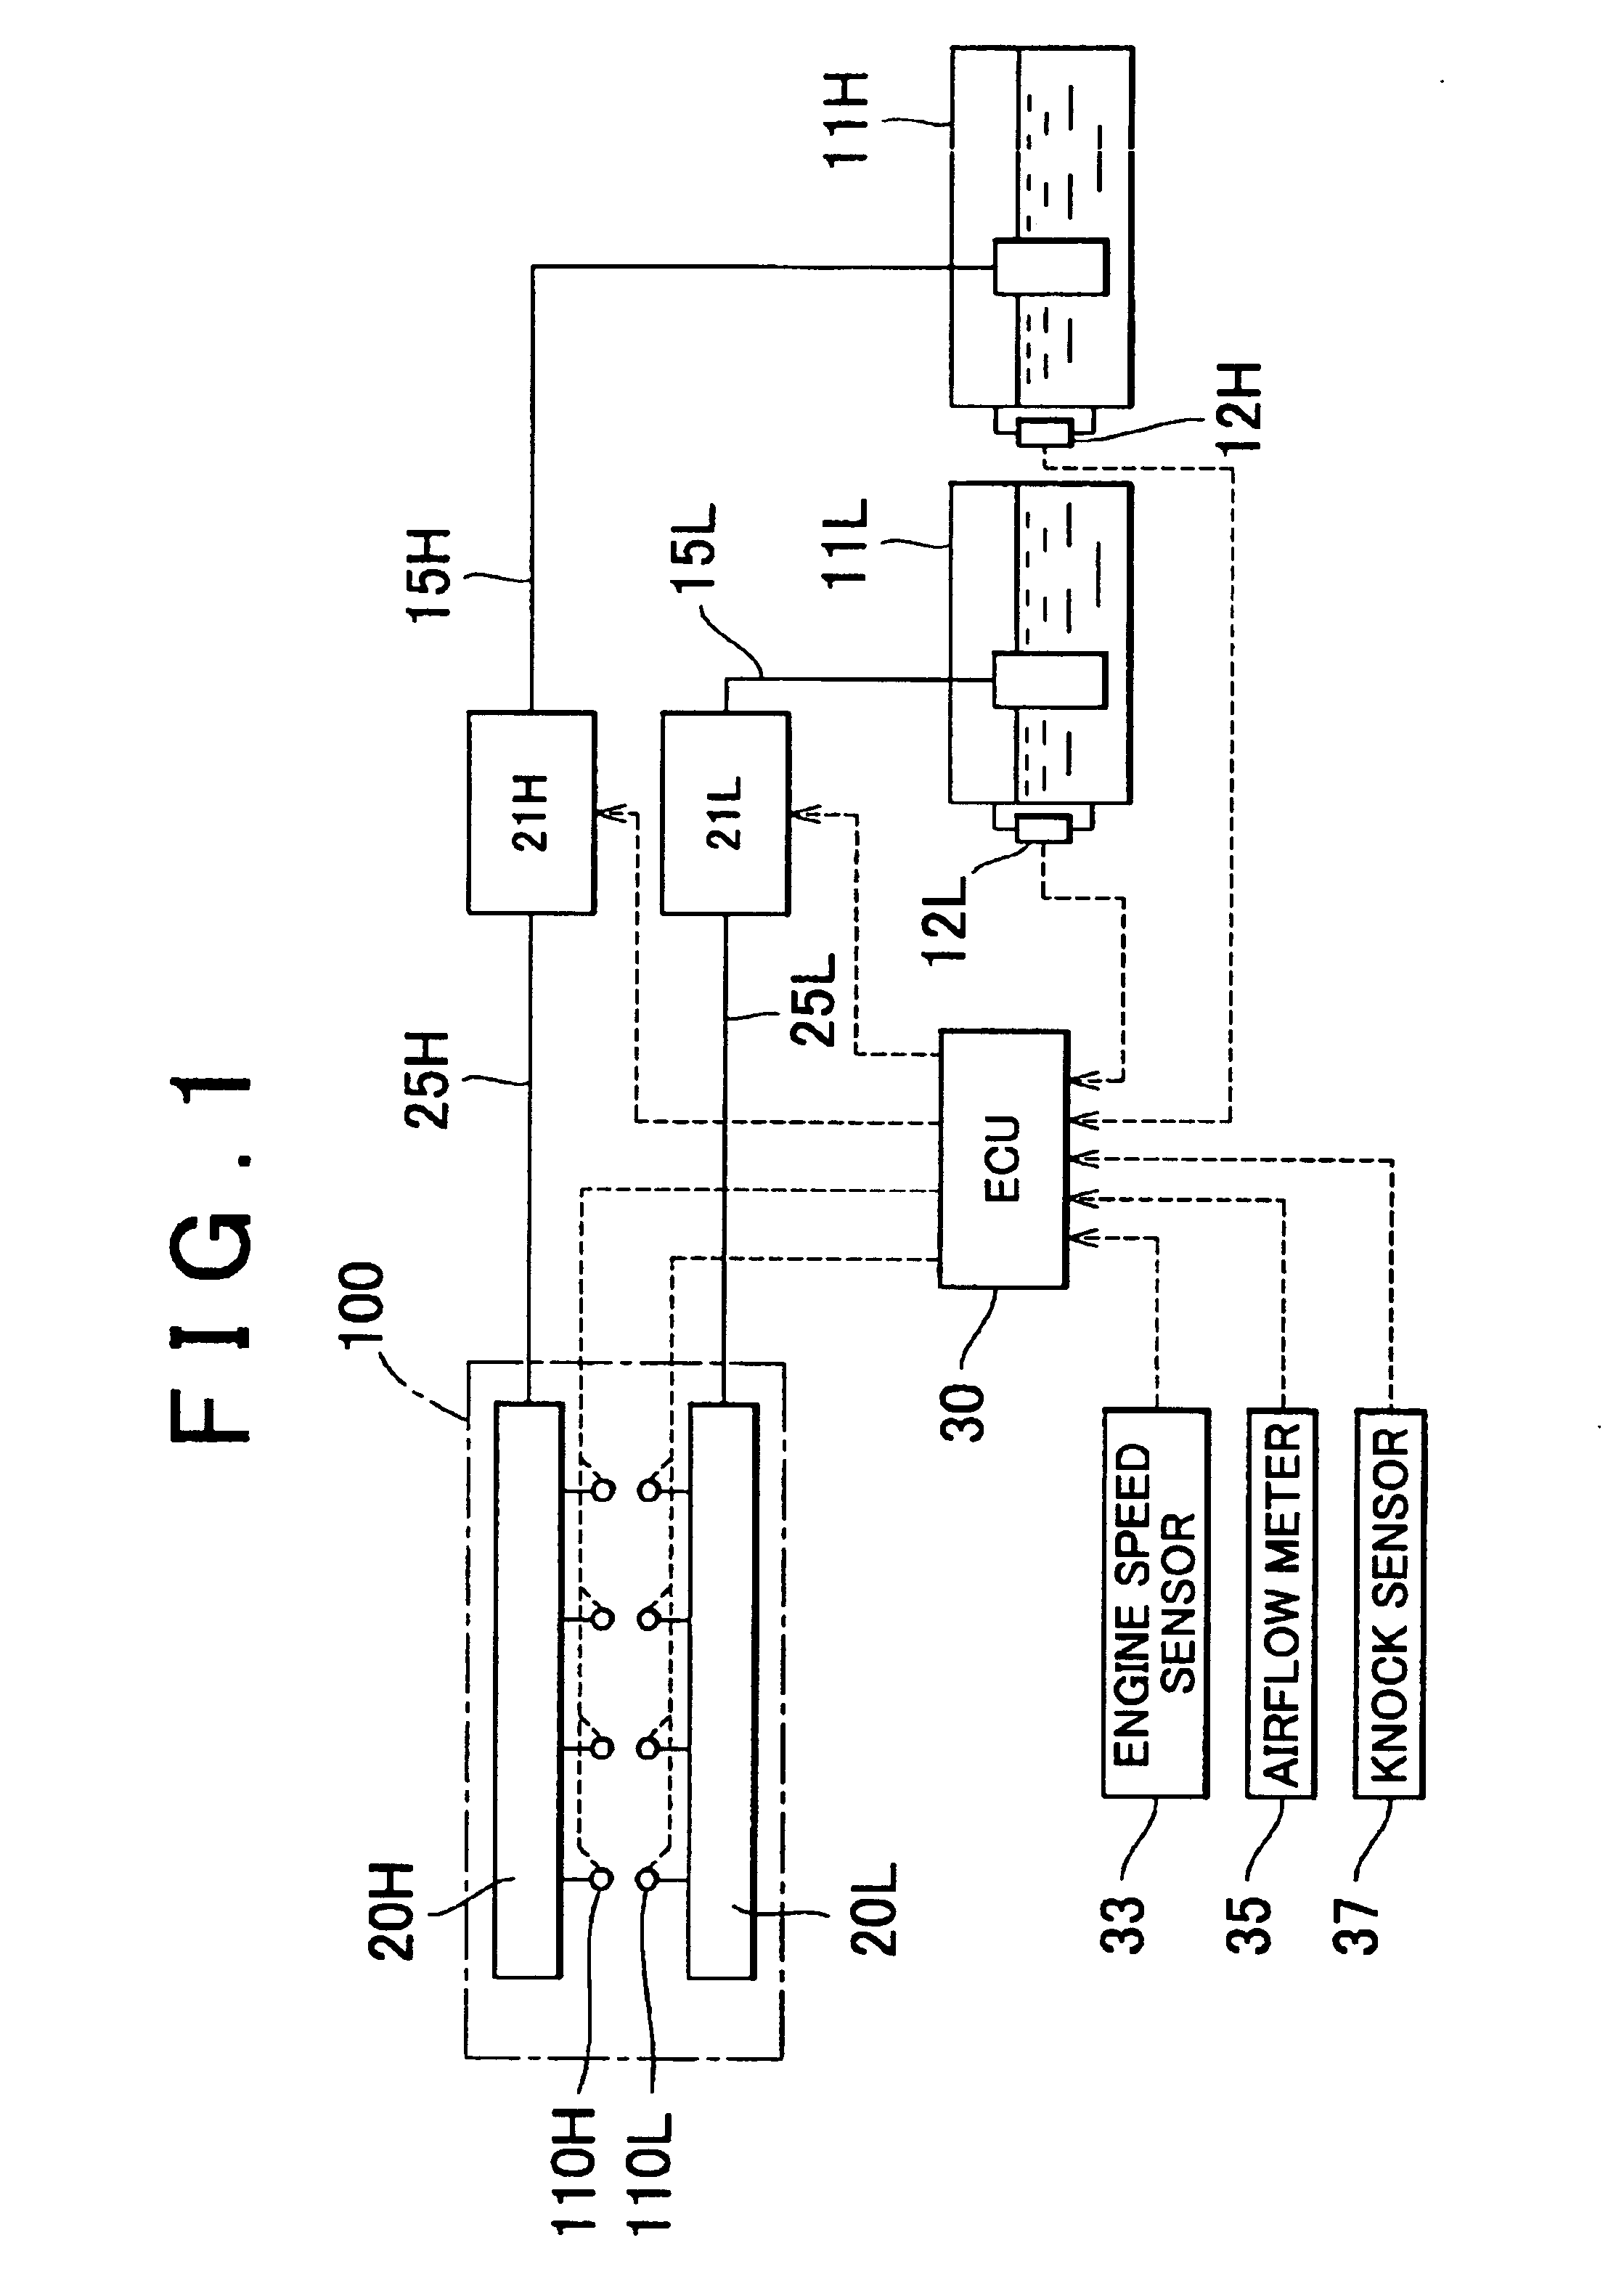 Knocking control system and method for internal combustion engine using multiple fuels